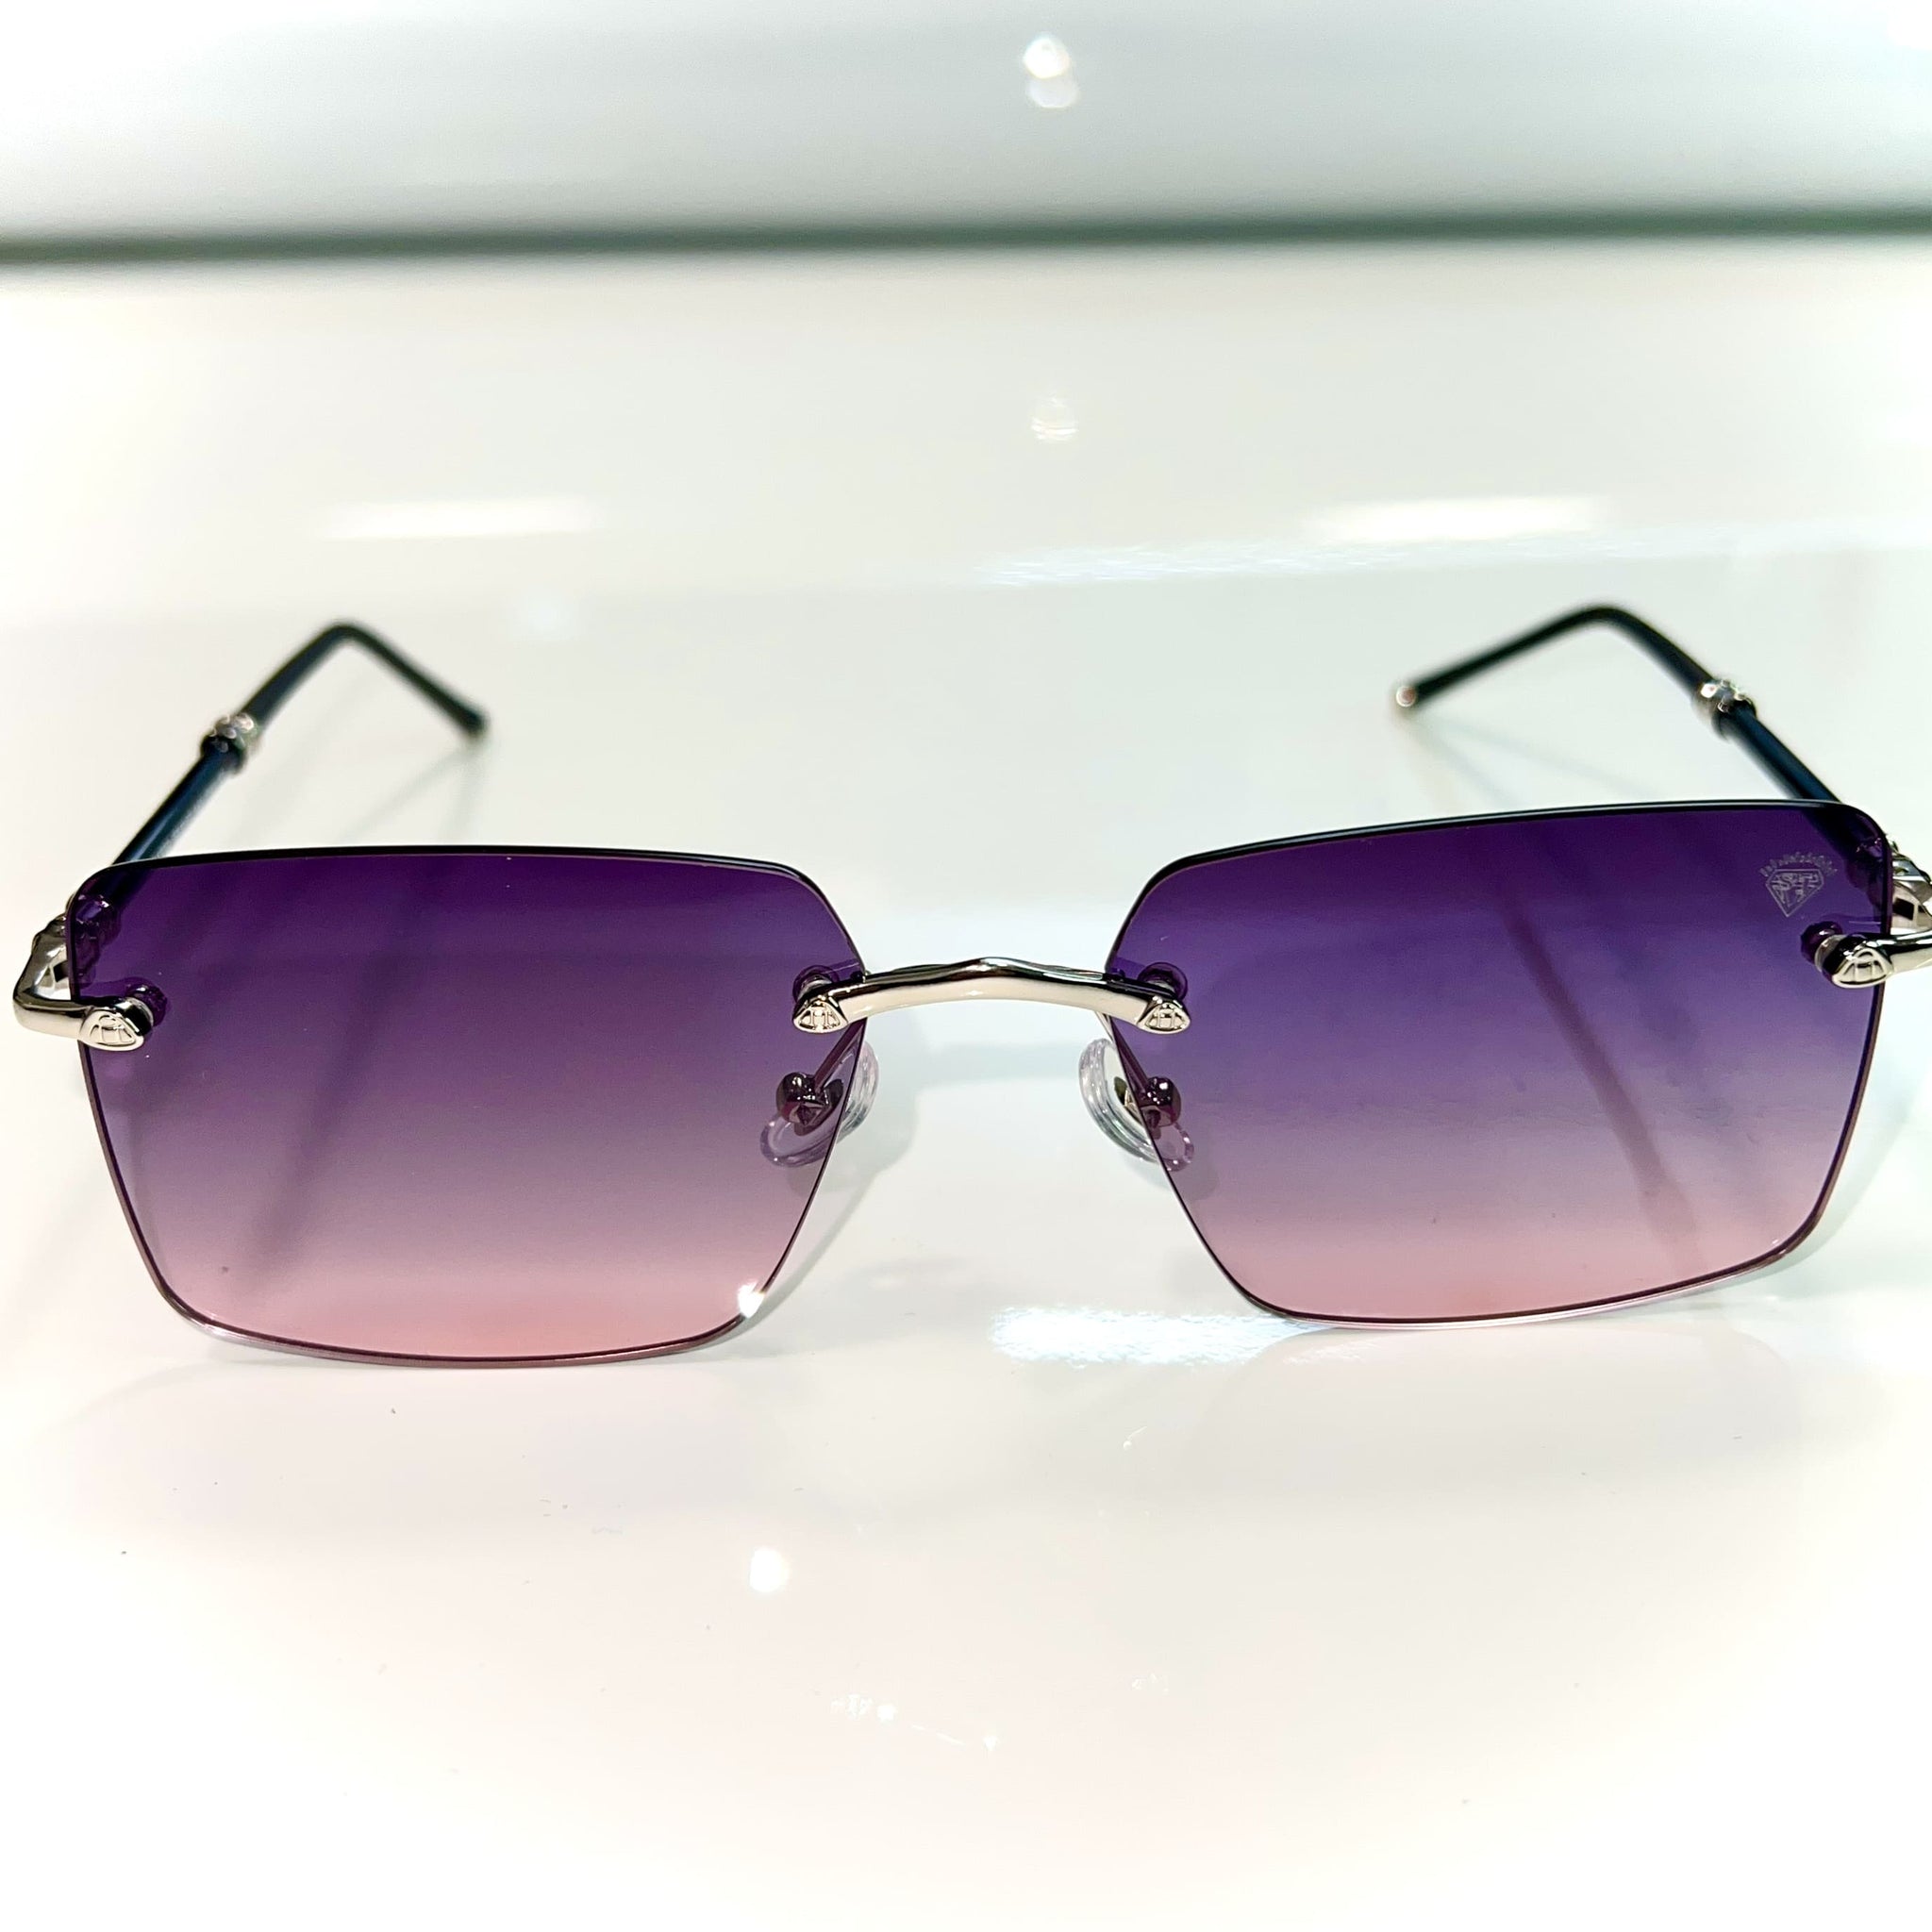 Eduardo Glasses - Silver 925 plated + Silicon side - Purple/Pink Shade - Sehgal Glasses